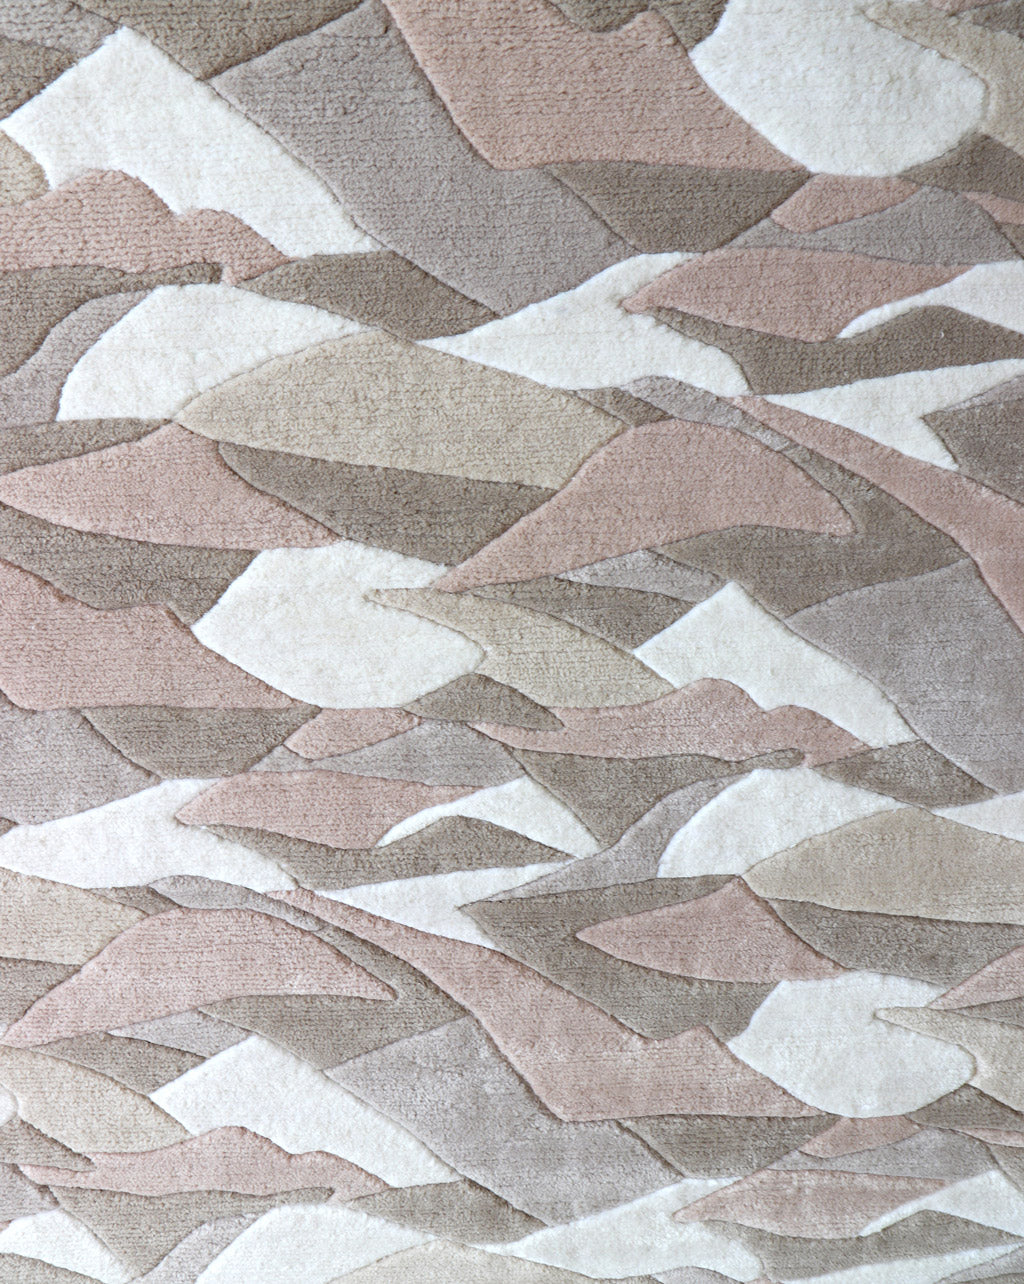 A Mani Hand Knotted Rug made of merino wool with a pattern of mountains on it.